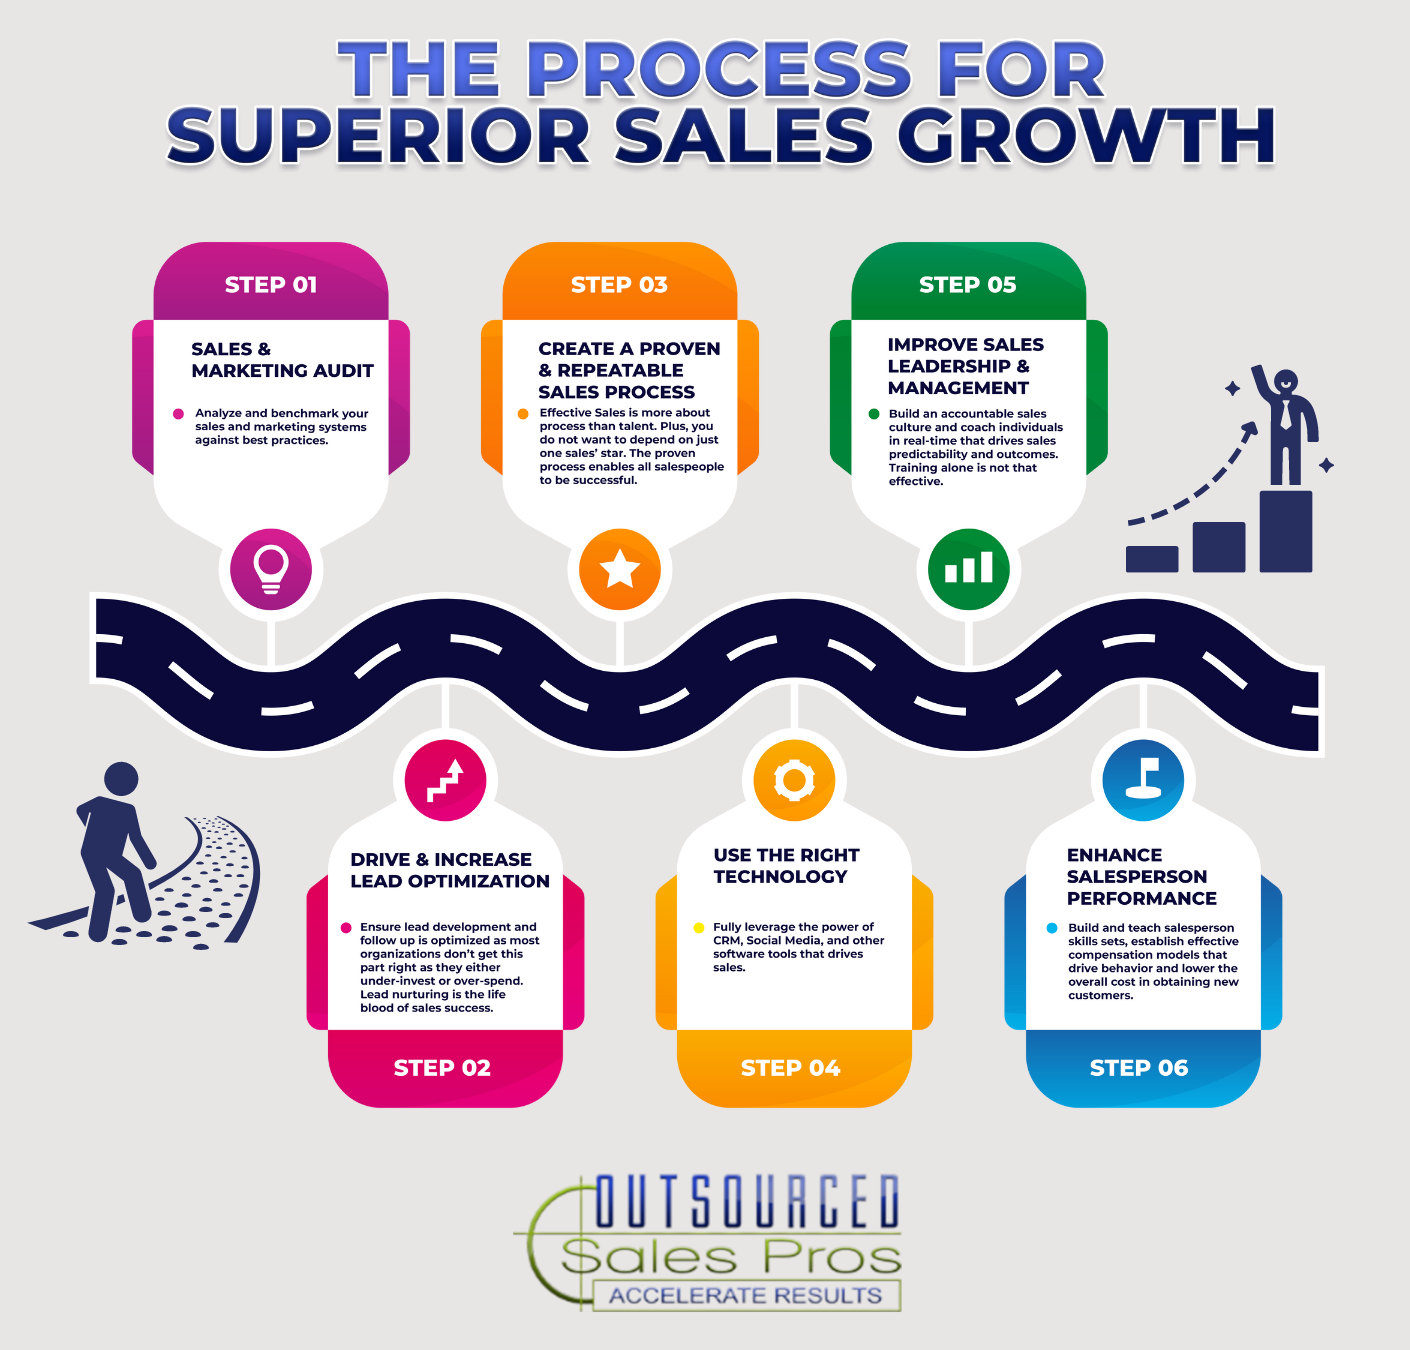 The Process for Superior Sales Growth